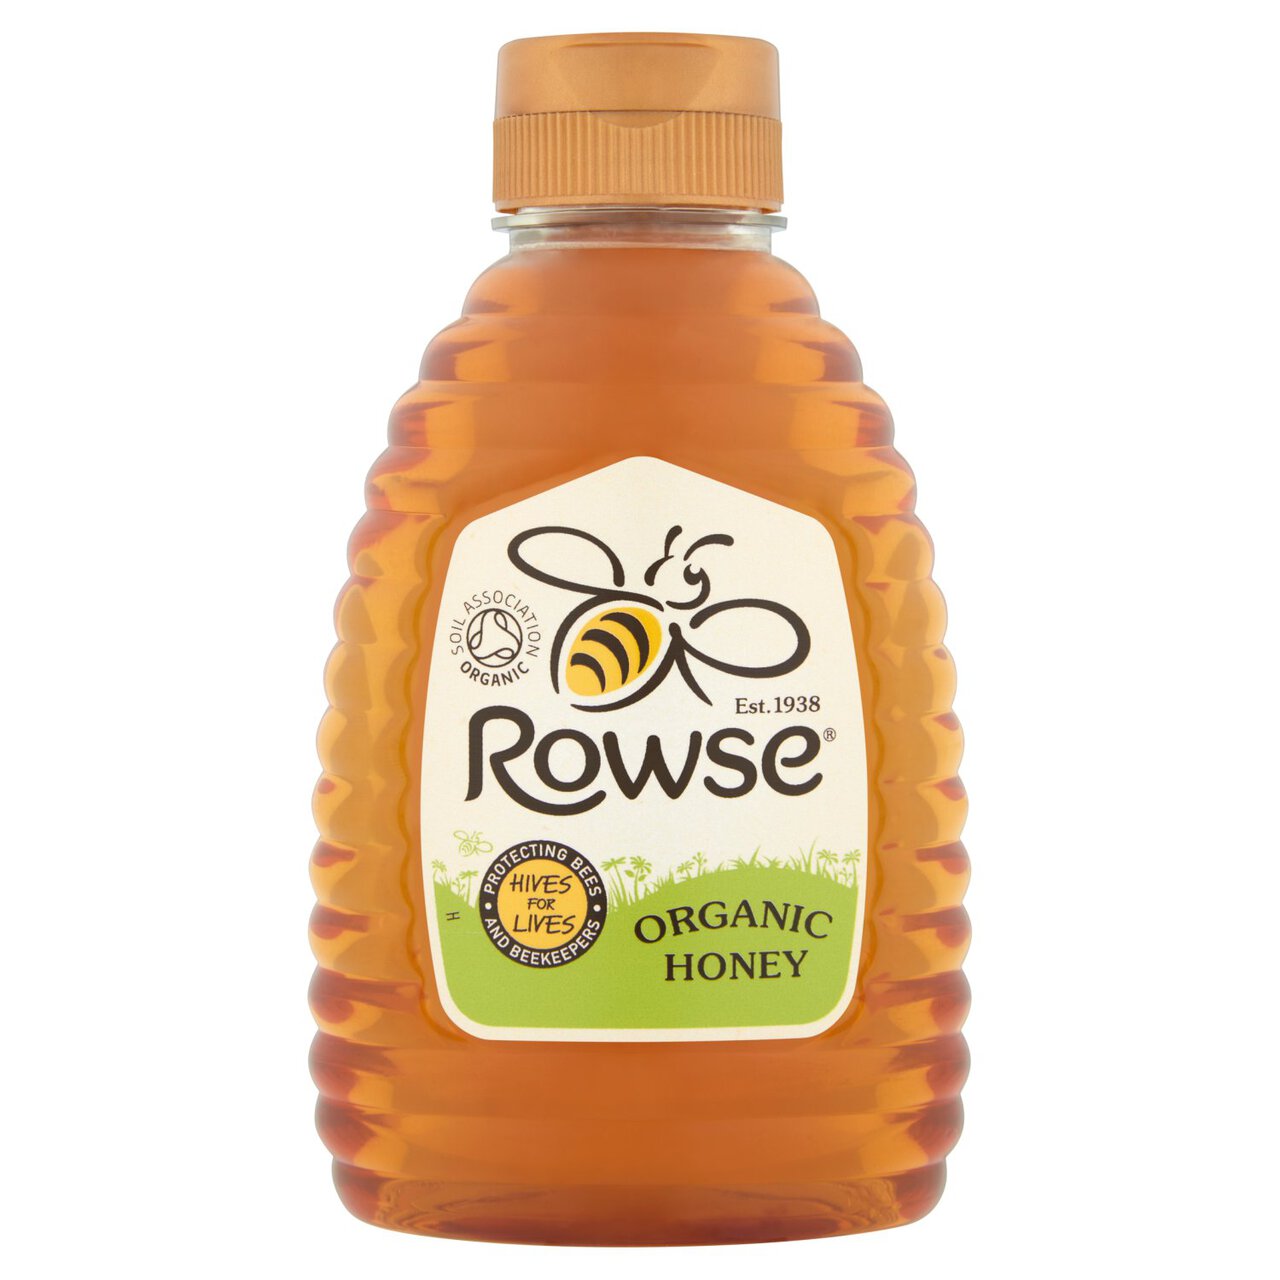 Rowse Organic Squeezable Honey 340g